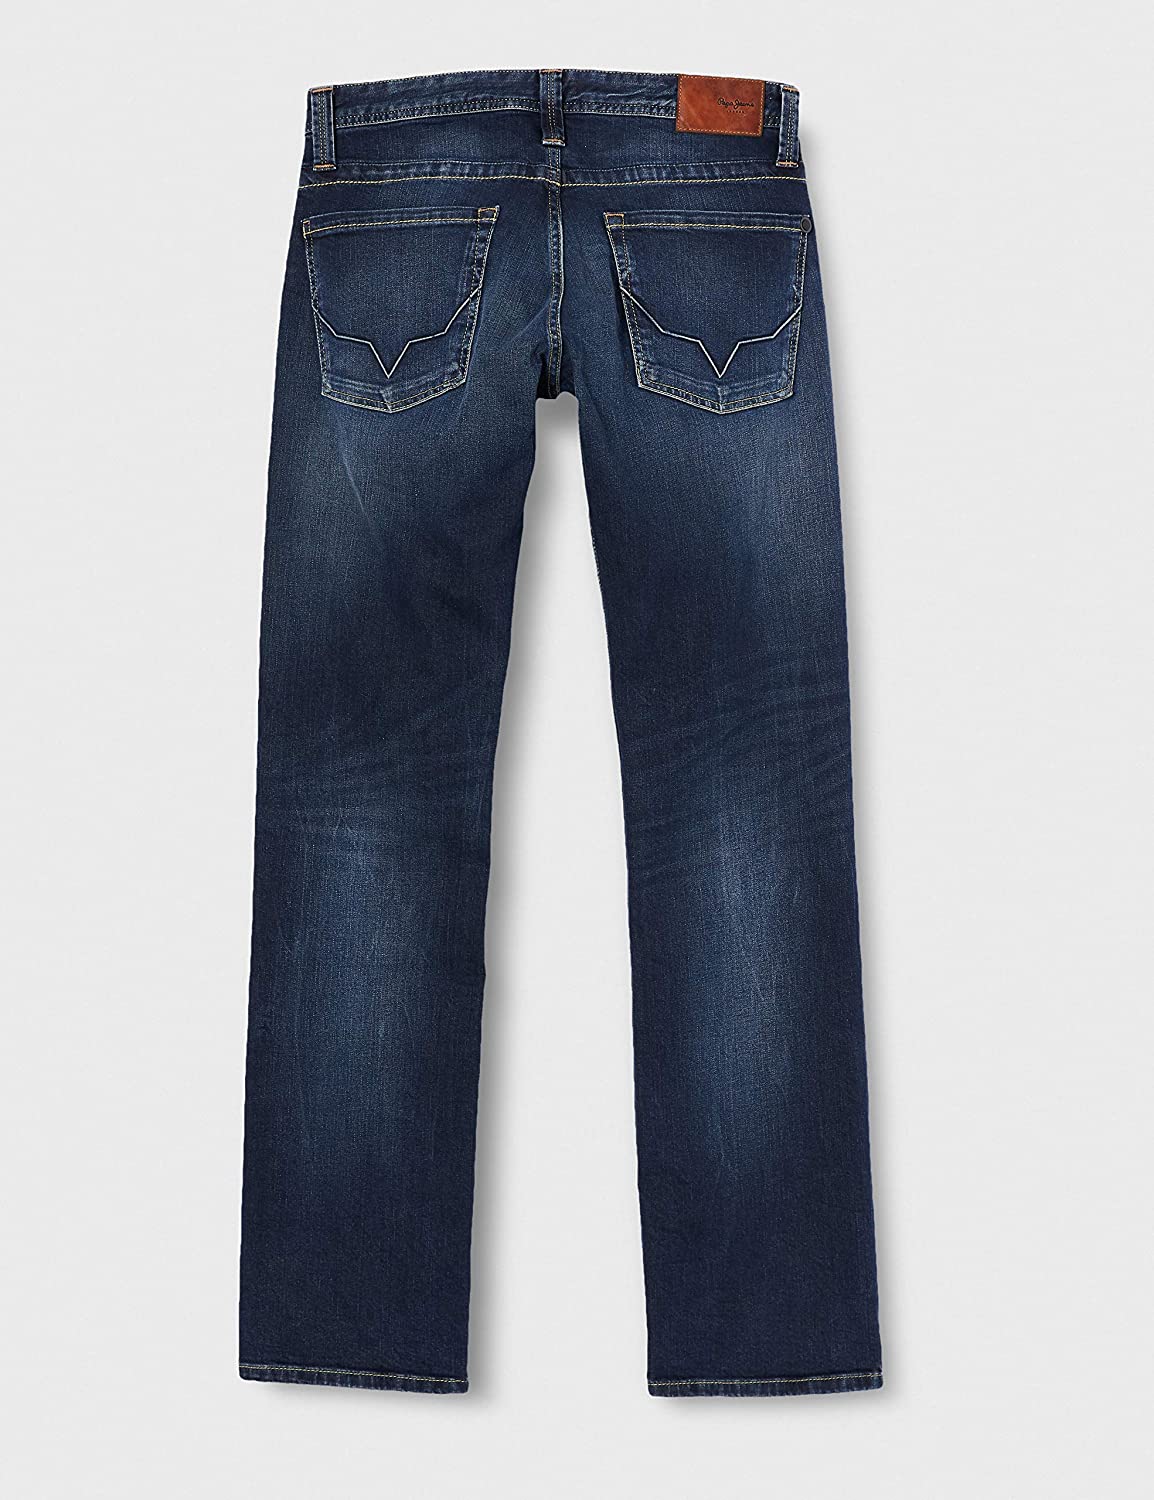 PEPE JEANS KINGSTON ZIP RELAXED FIT Z45